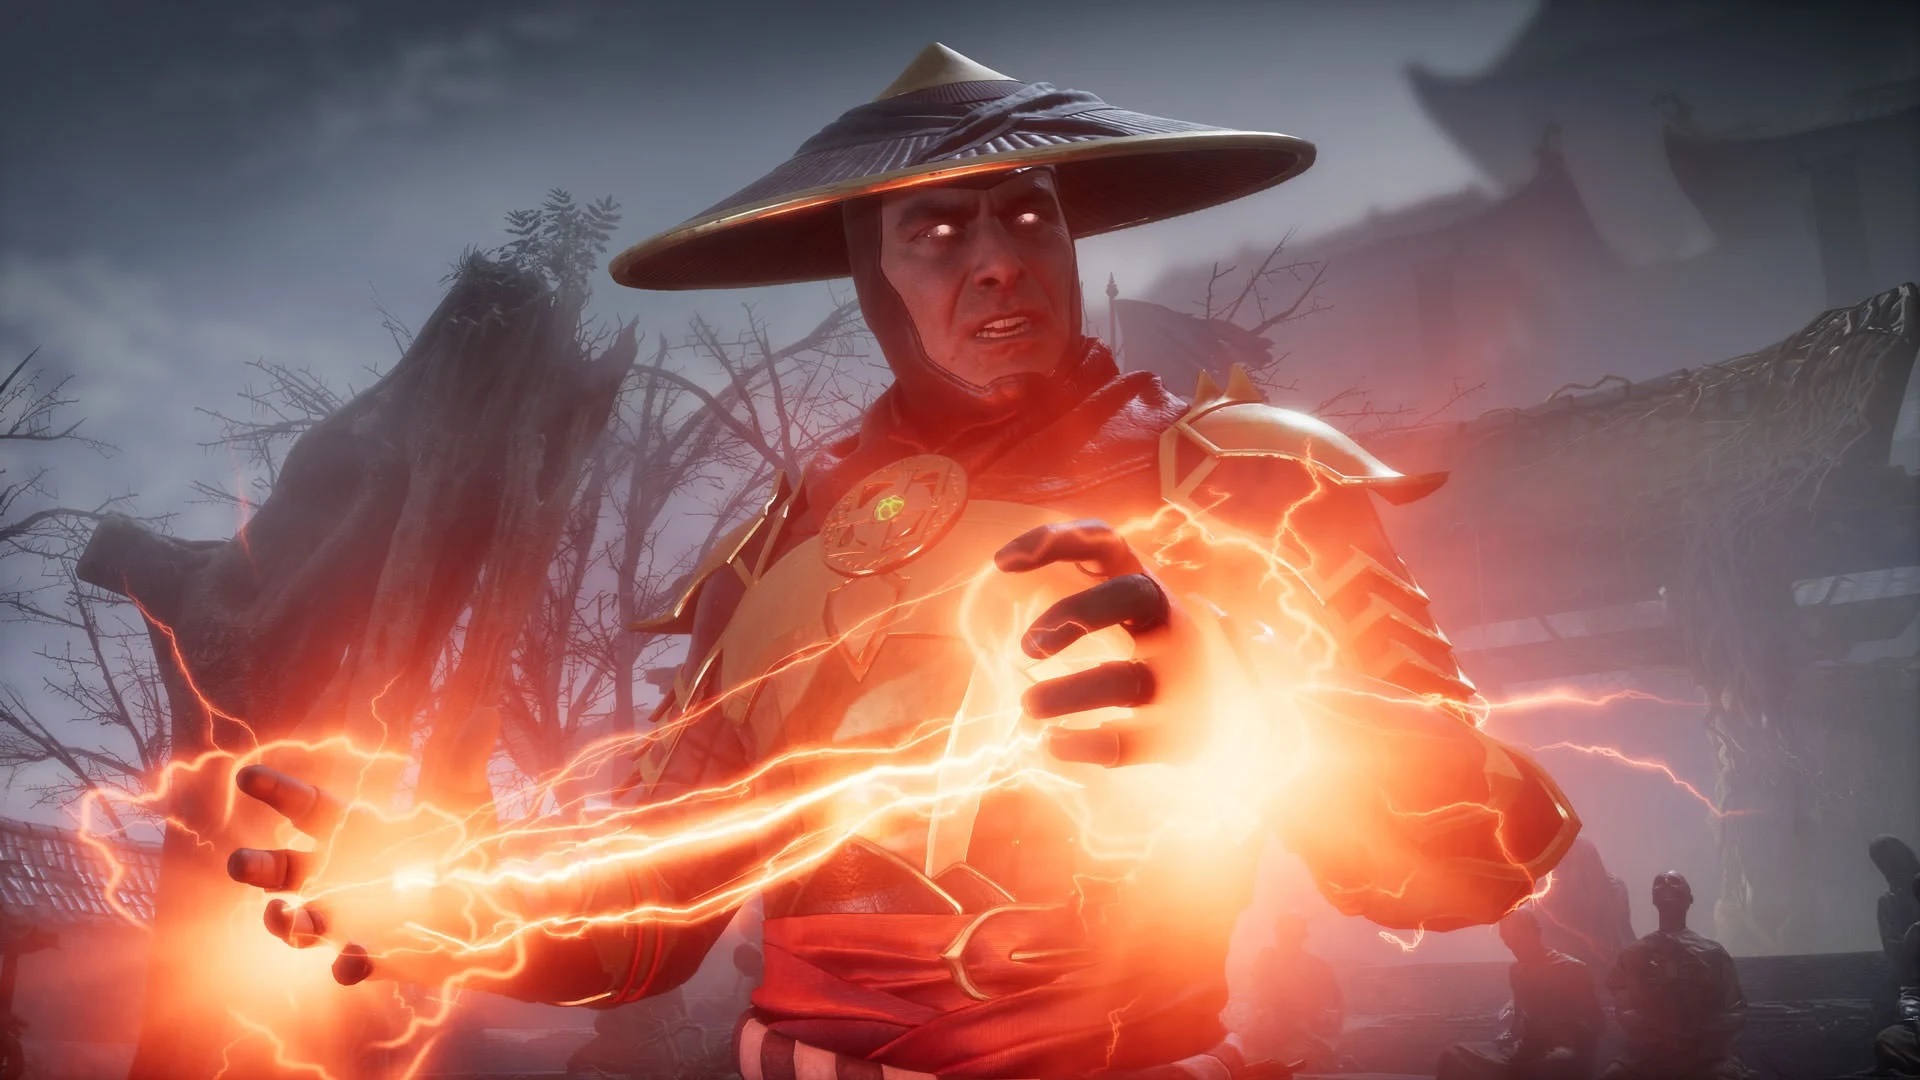 New Mortal Kombat 1 Update Out Now on Xbox, Switch, PS5 and PC - News